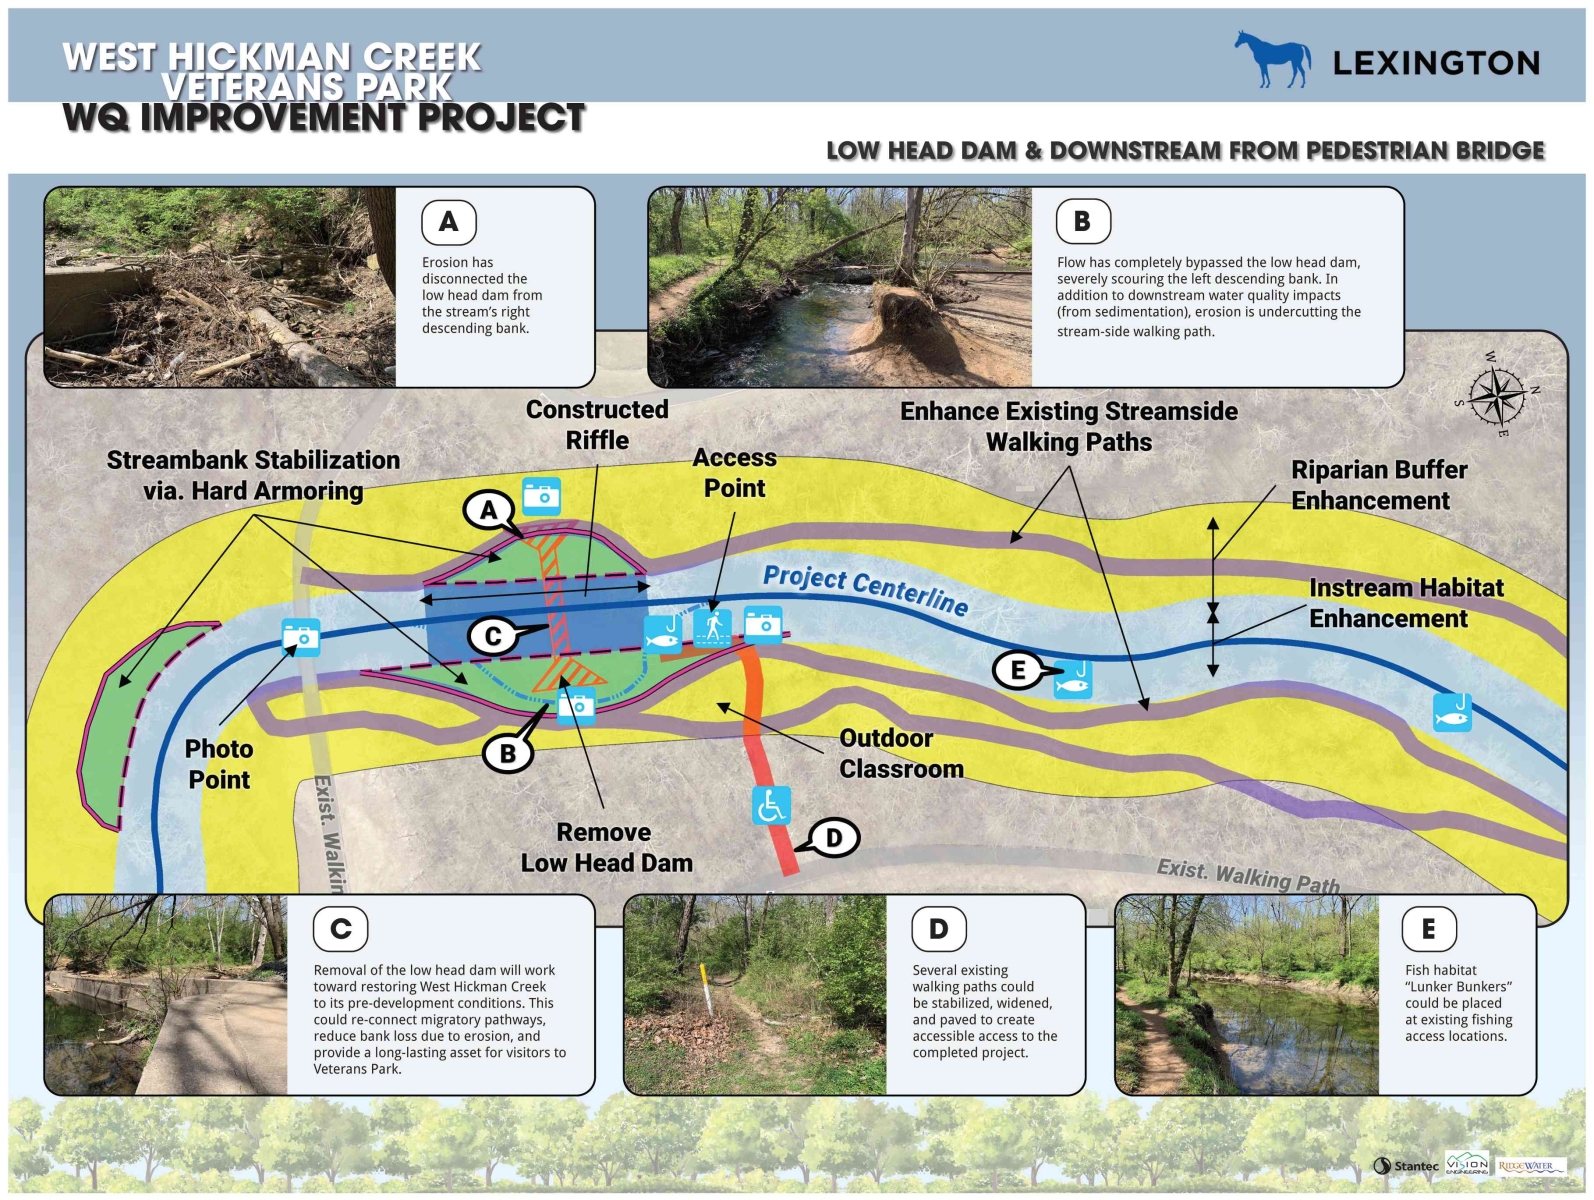 diagram of stream improvements that include bank stabilization, creek access points, walking paths and habitat improvements